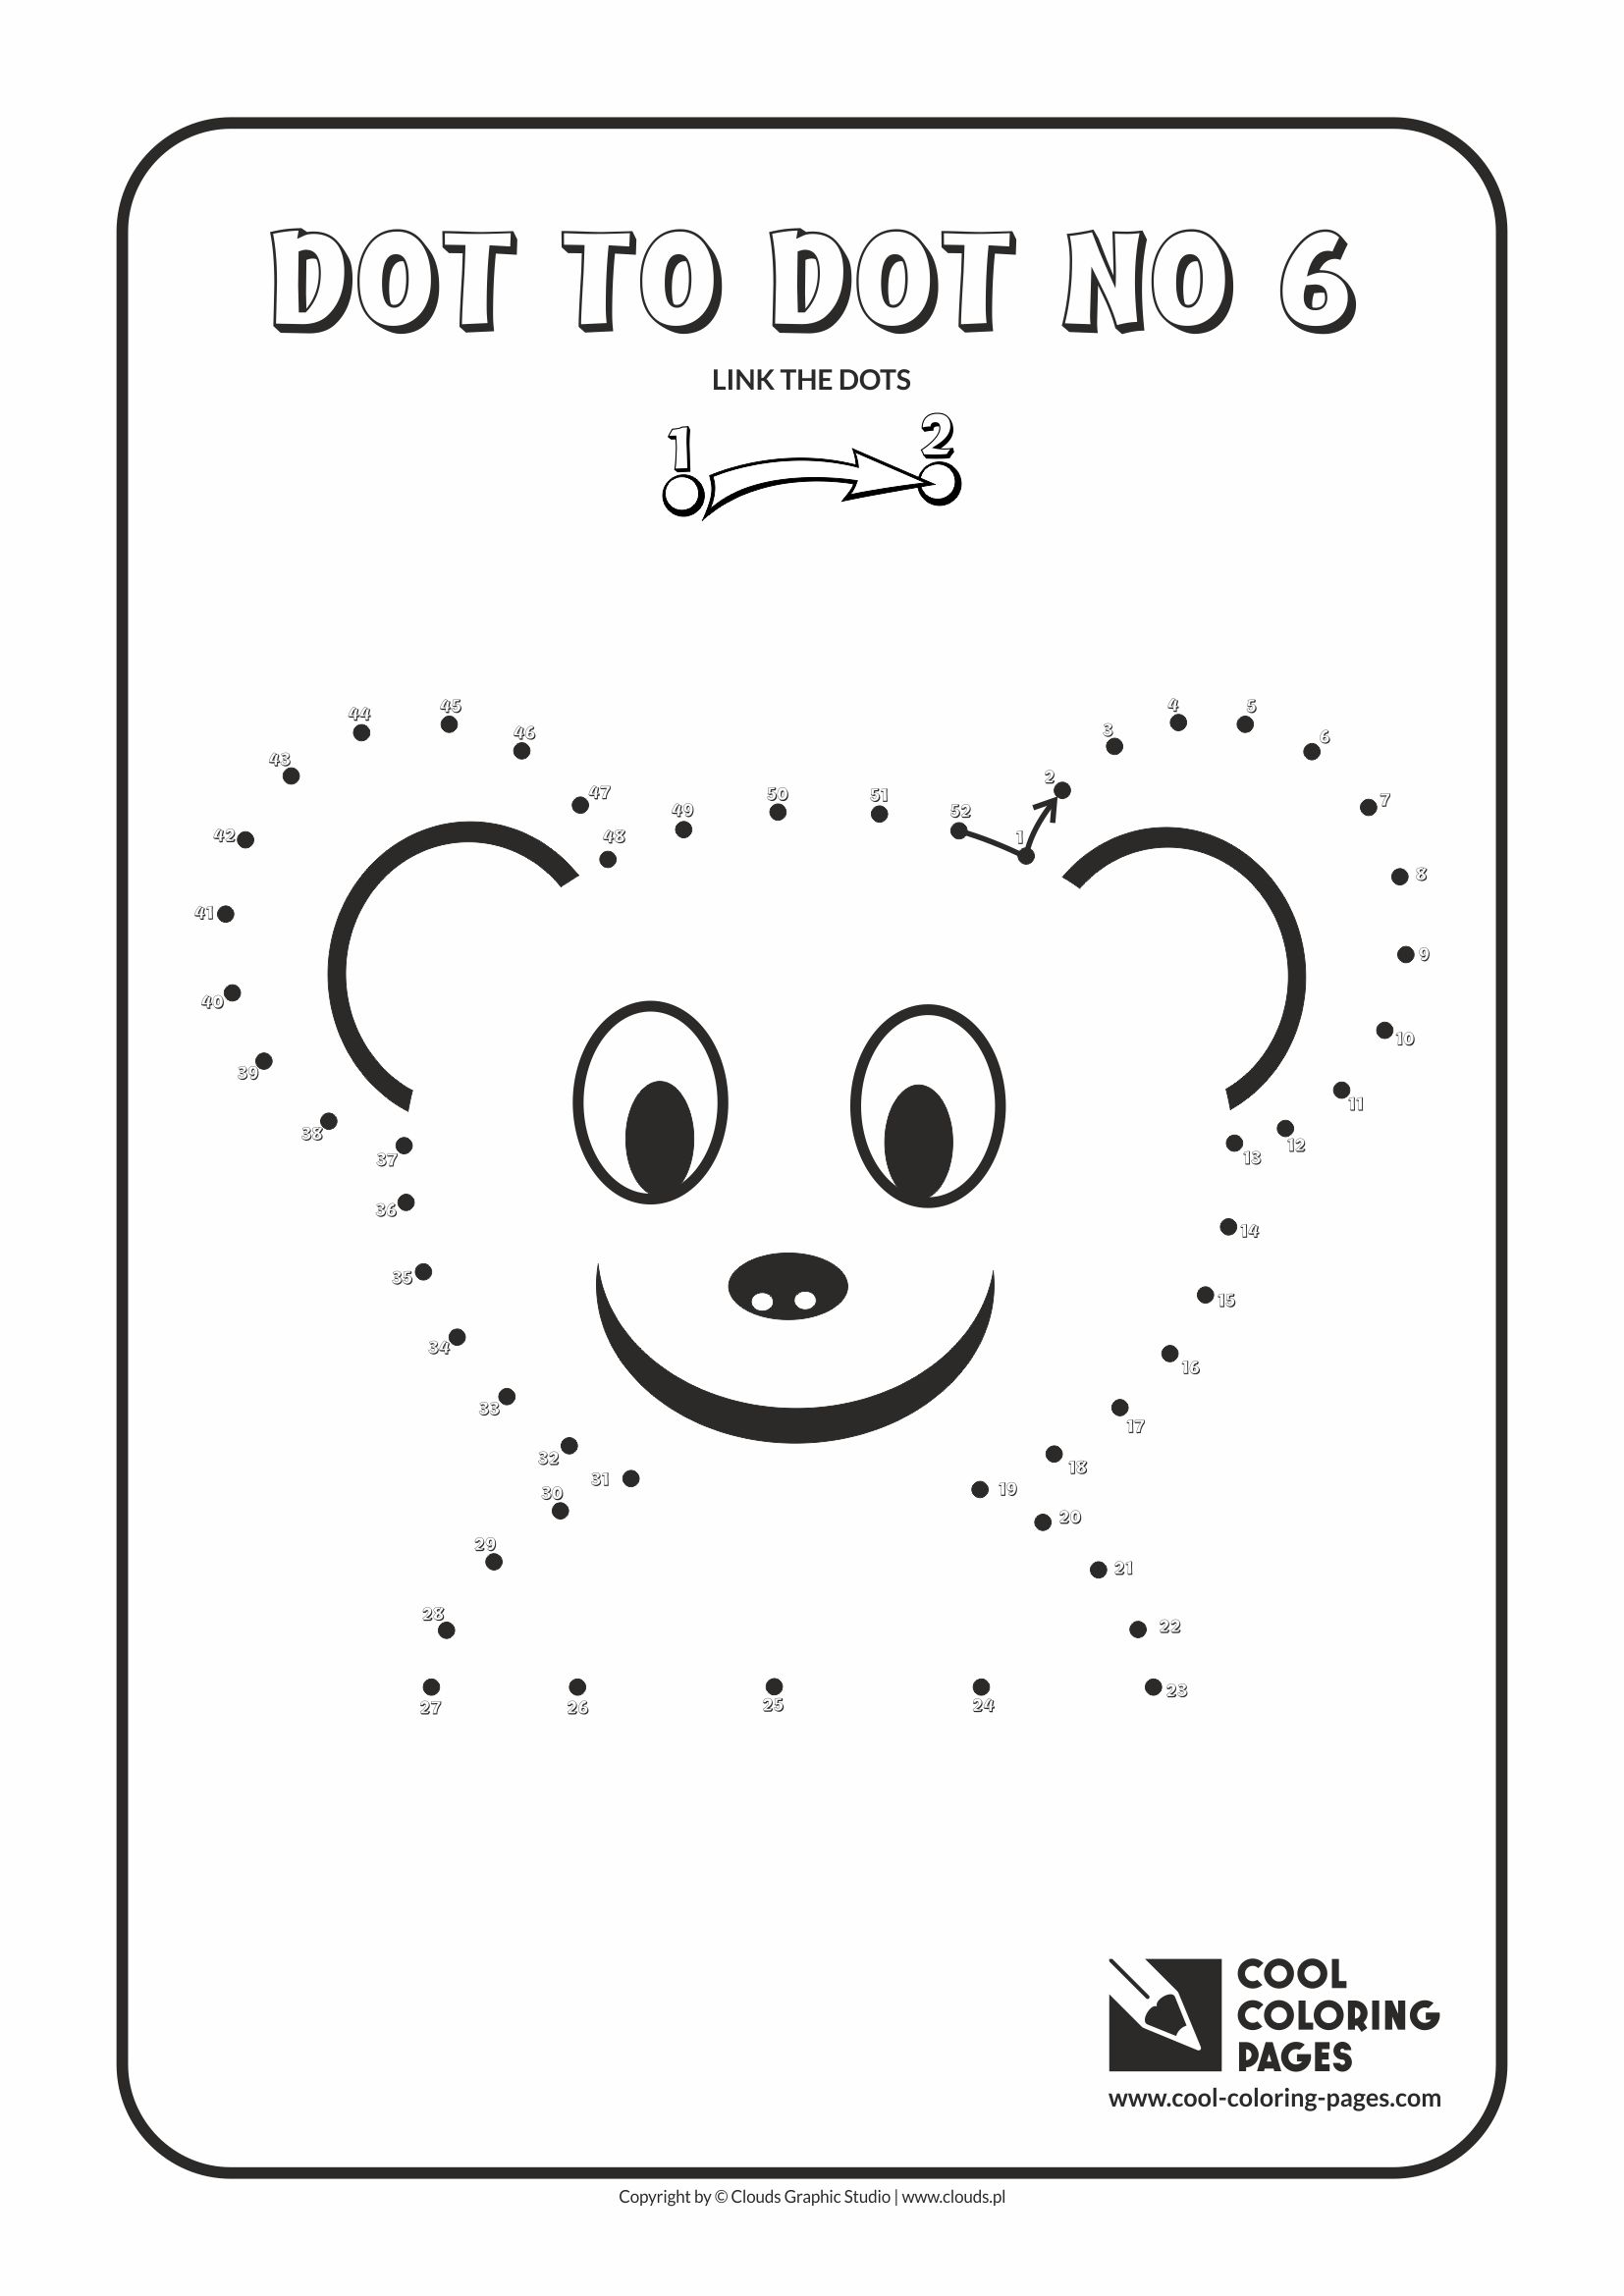 Cool Coloring Pages - Dot to dot / Dot to dot no 6